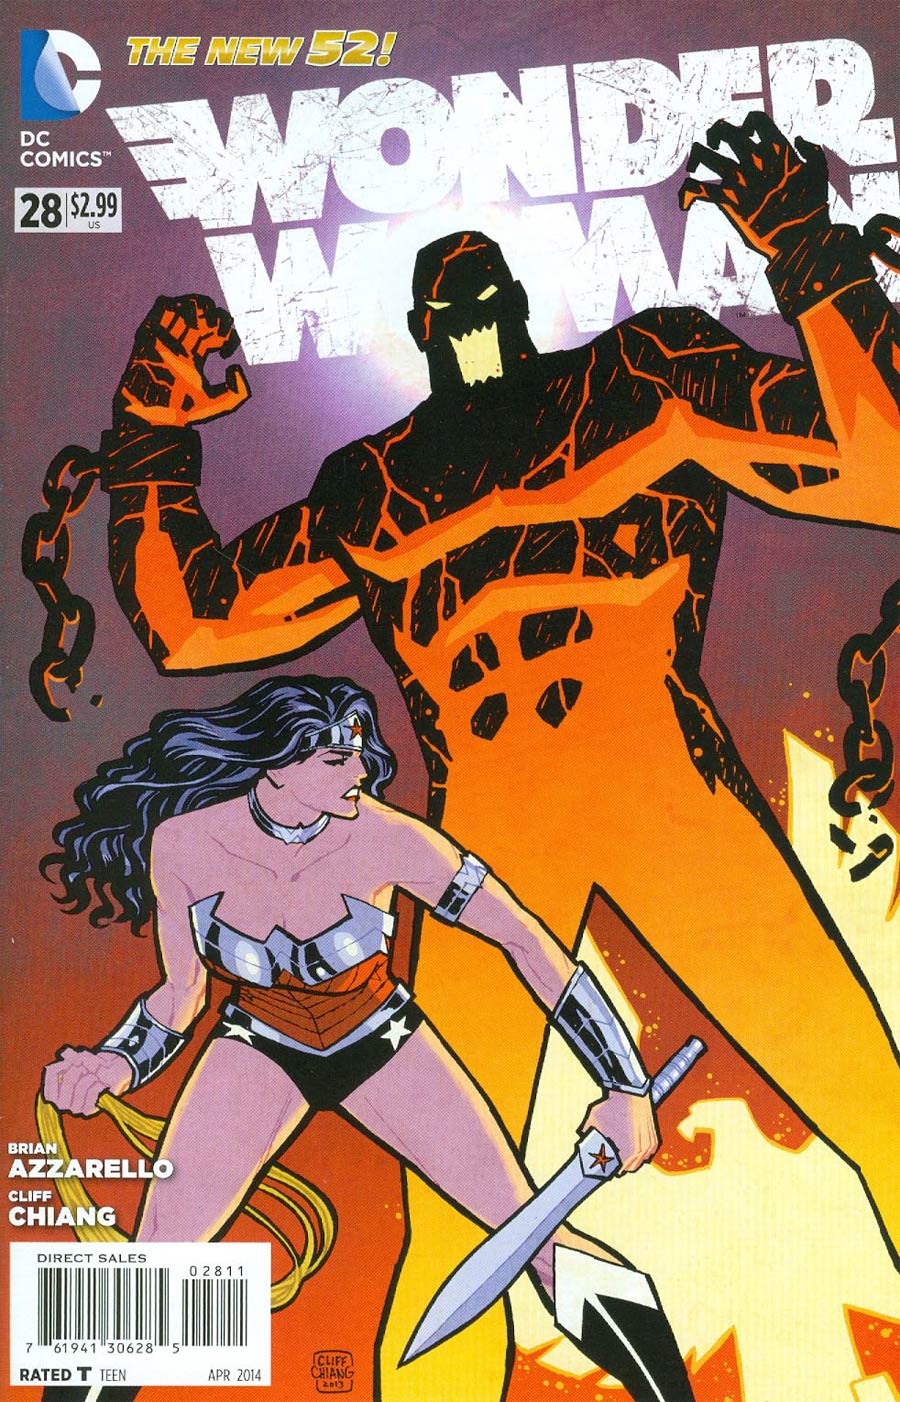 Wonder Woman Vol 4 #28 Cover A Regular Cliff Chiang Cover